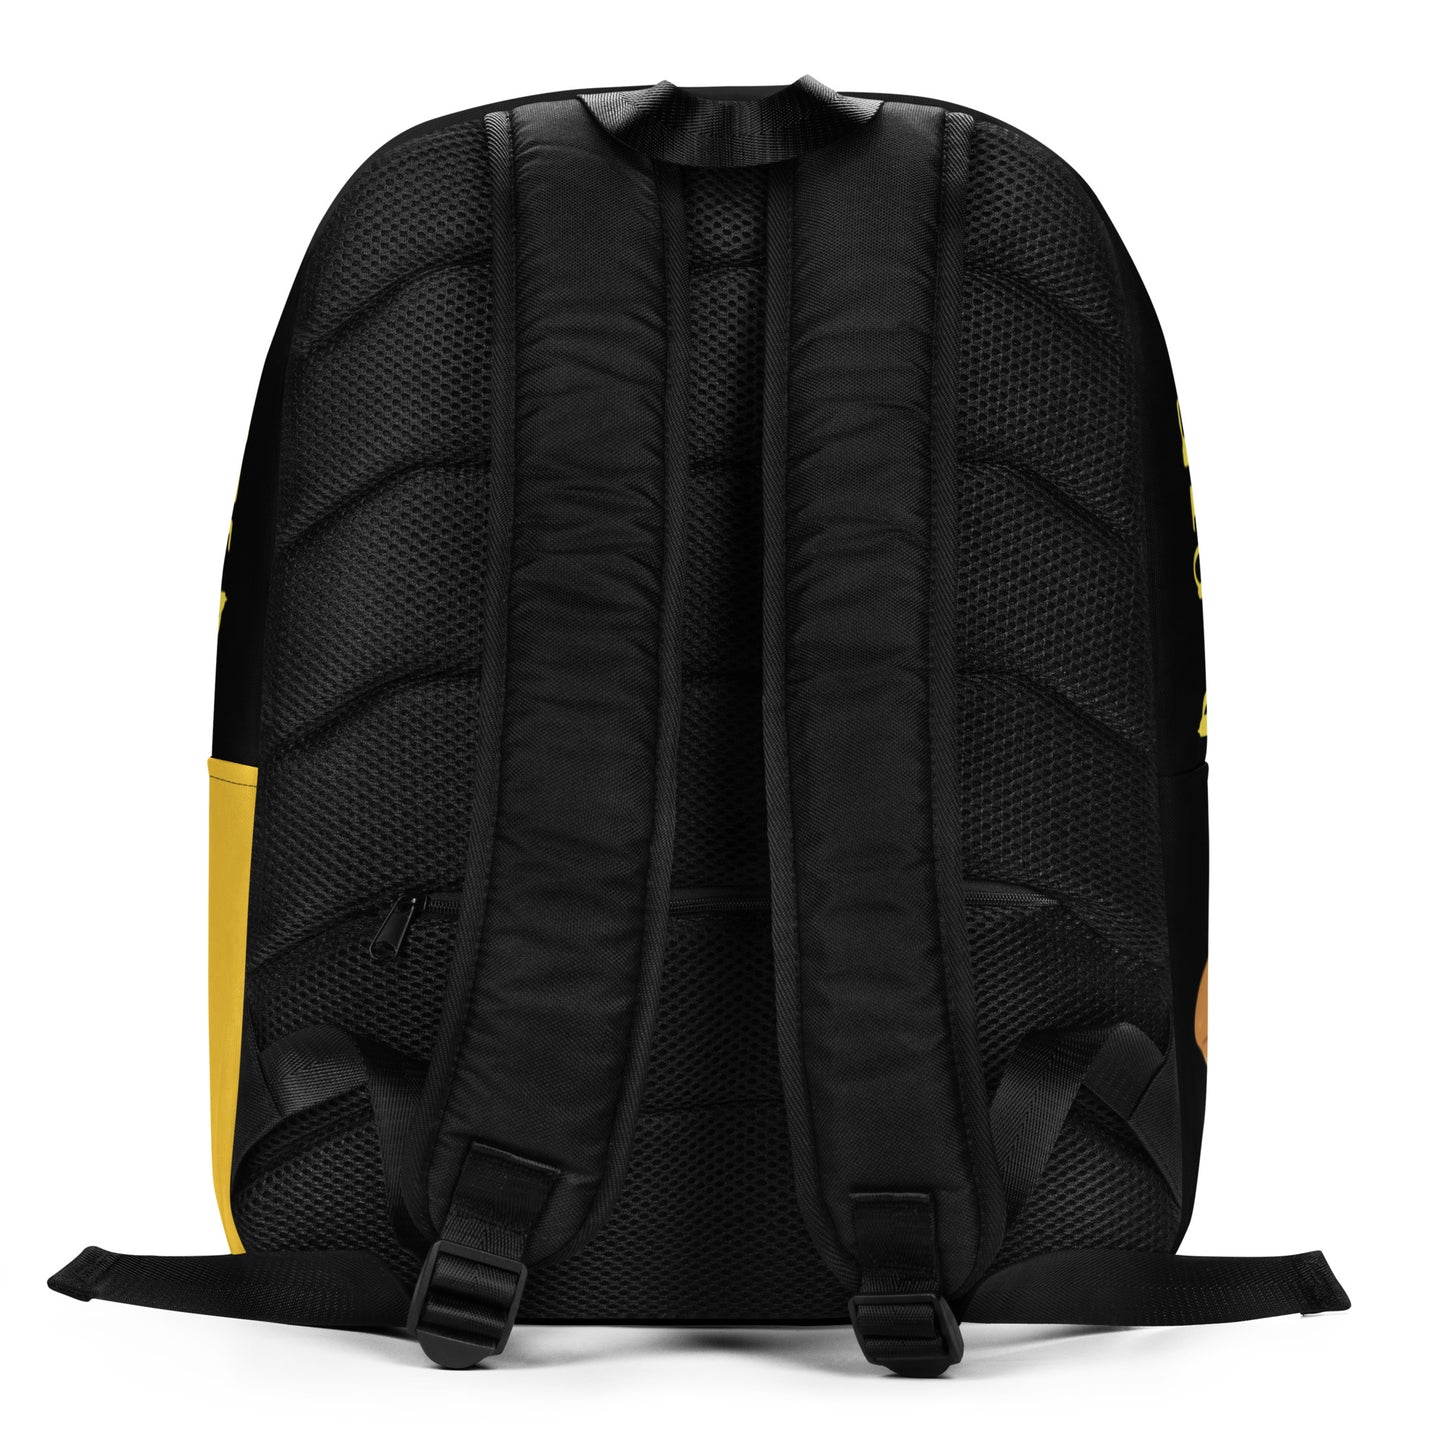 "Curry DOPiFiED" Backpack